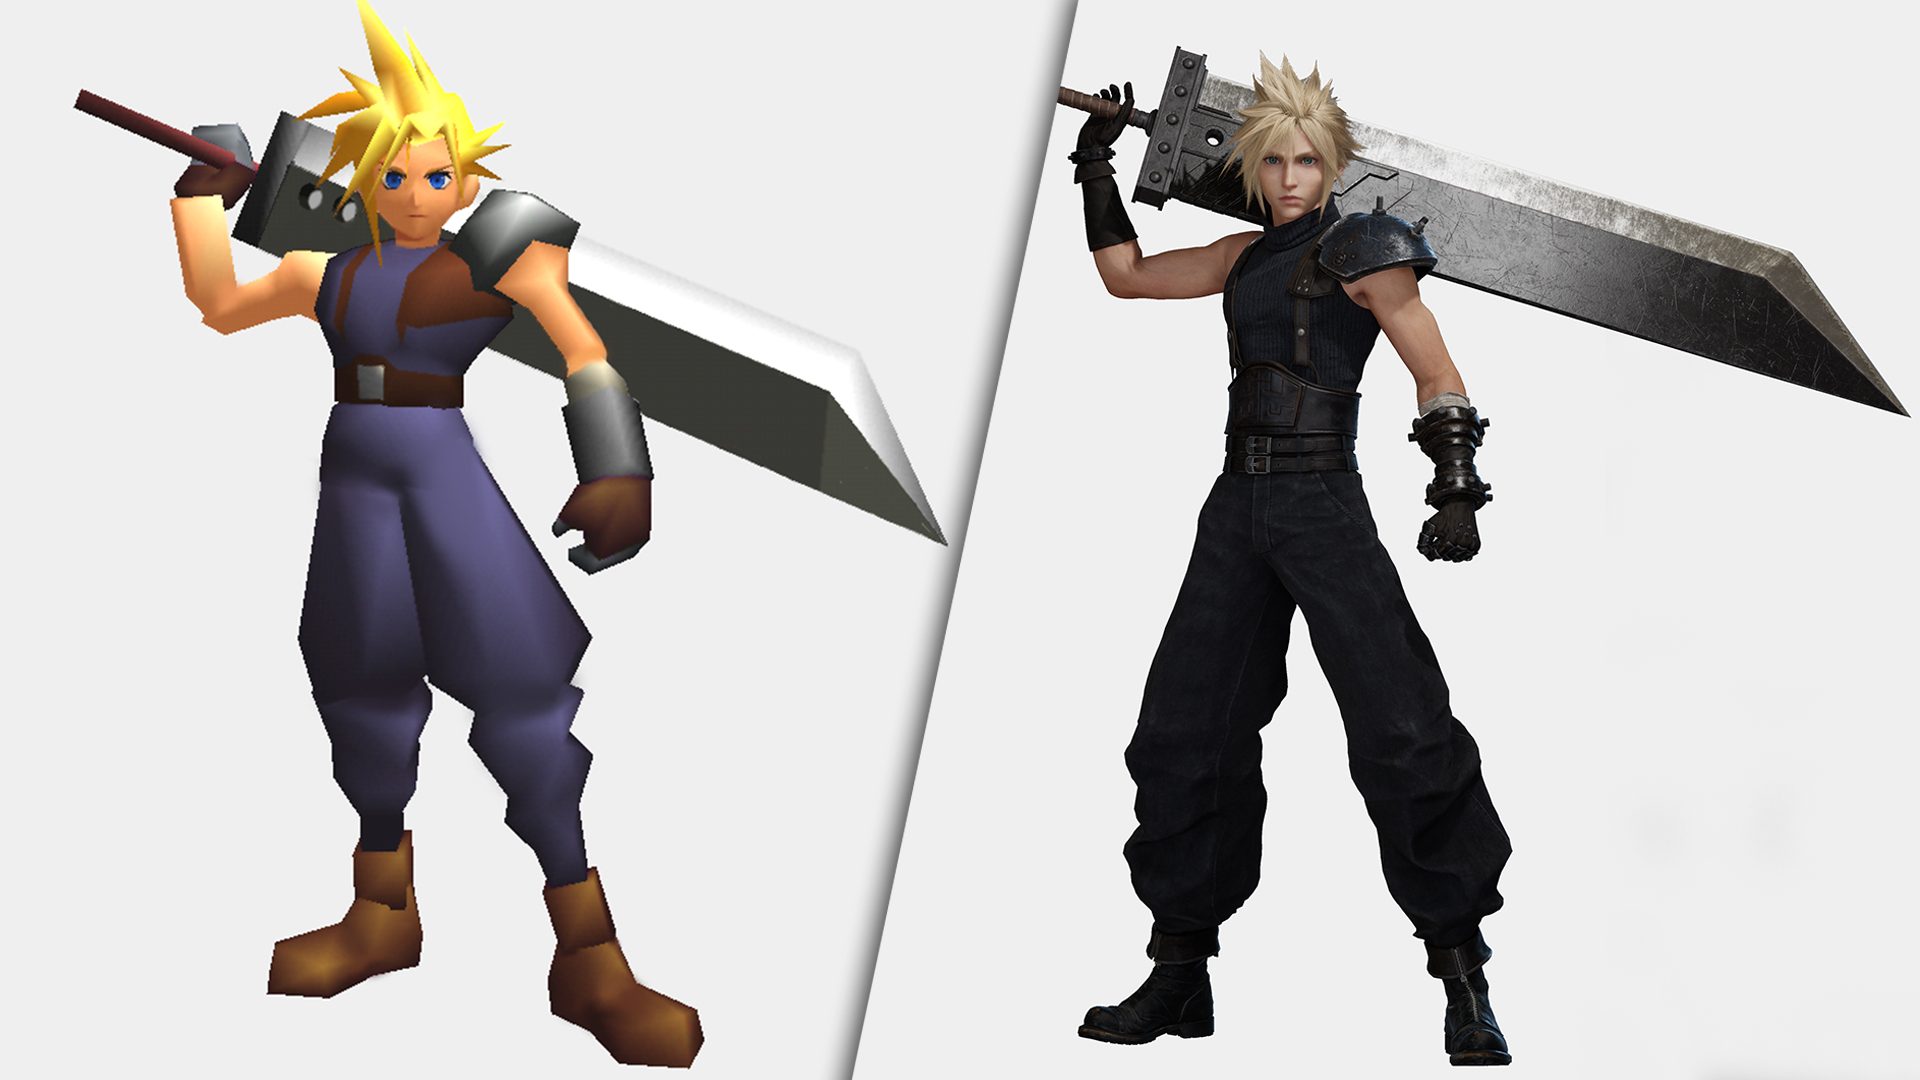 Final Fantasy VII Rebirth: The polygonal evolution from 1997 to 